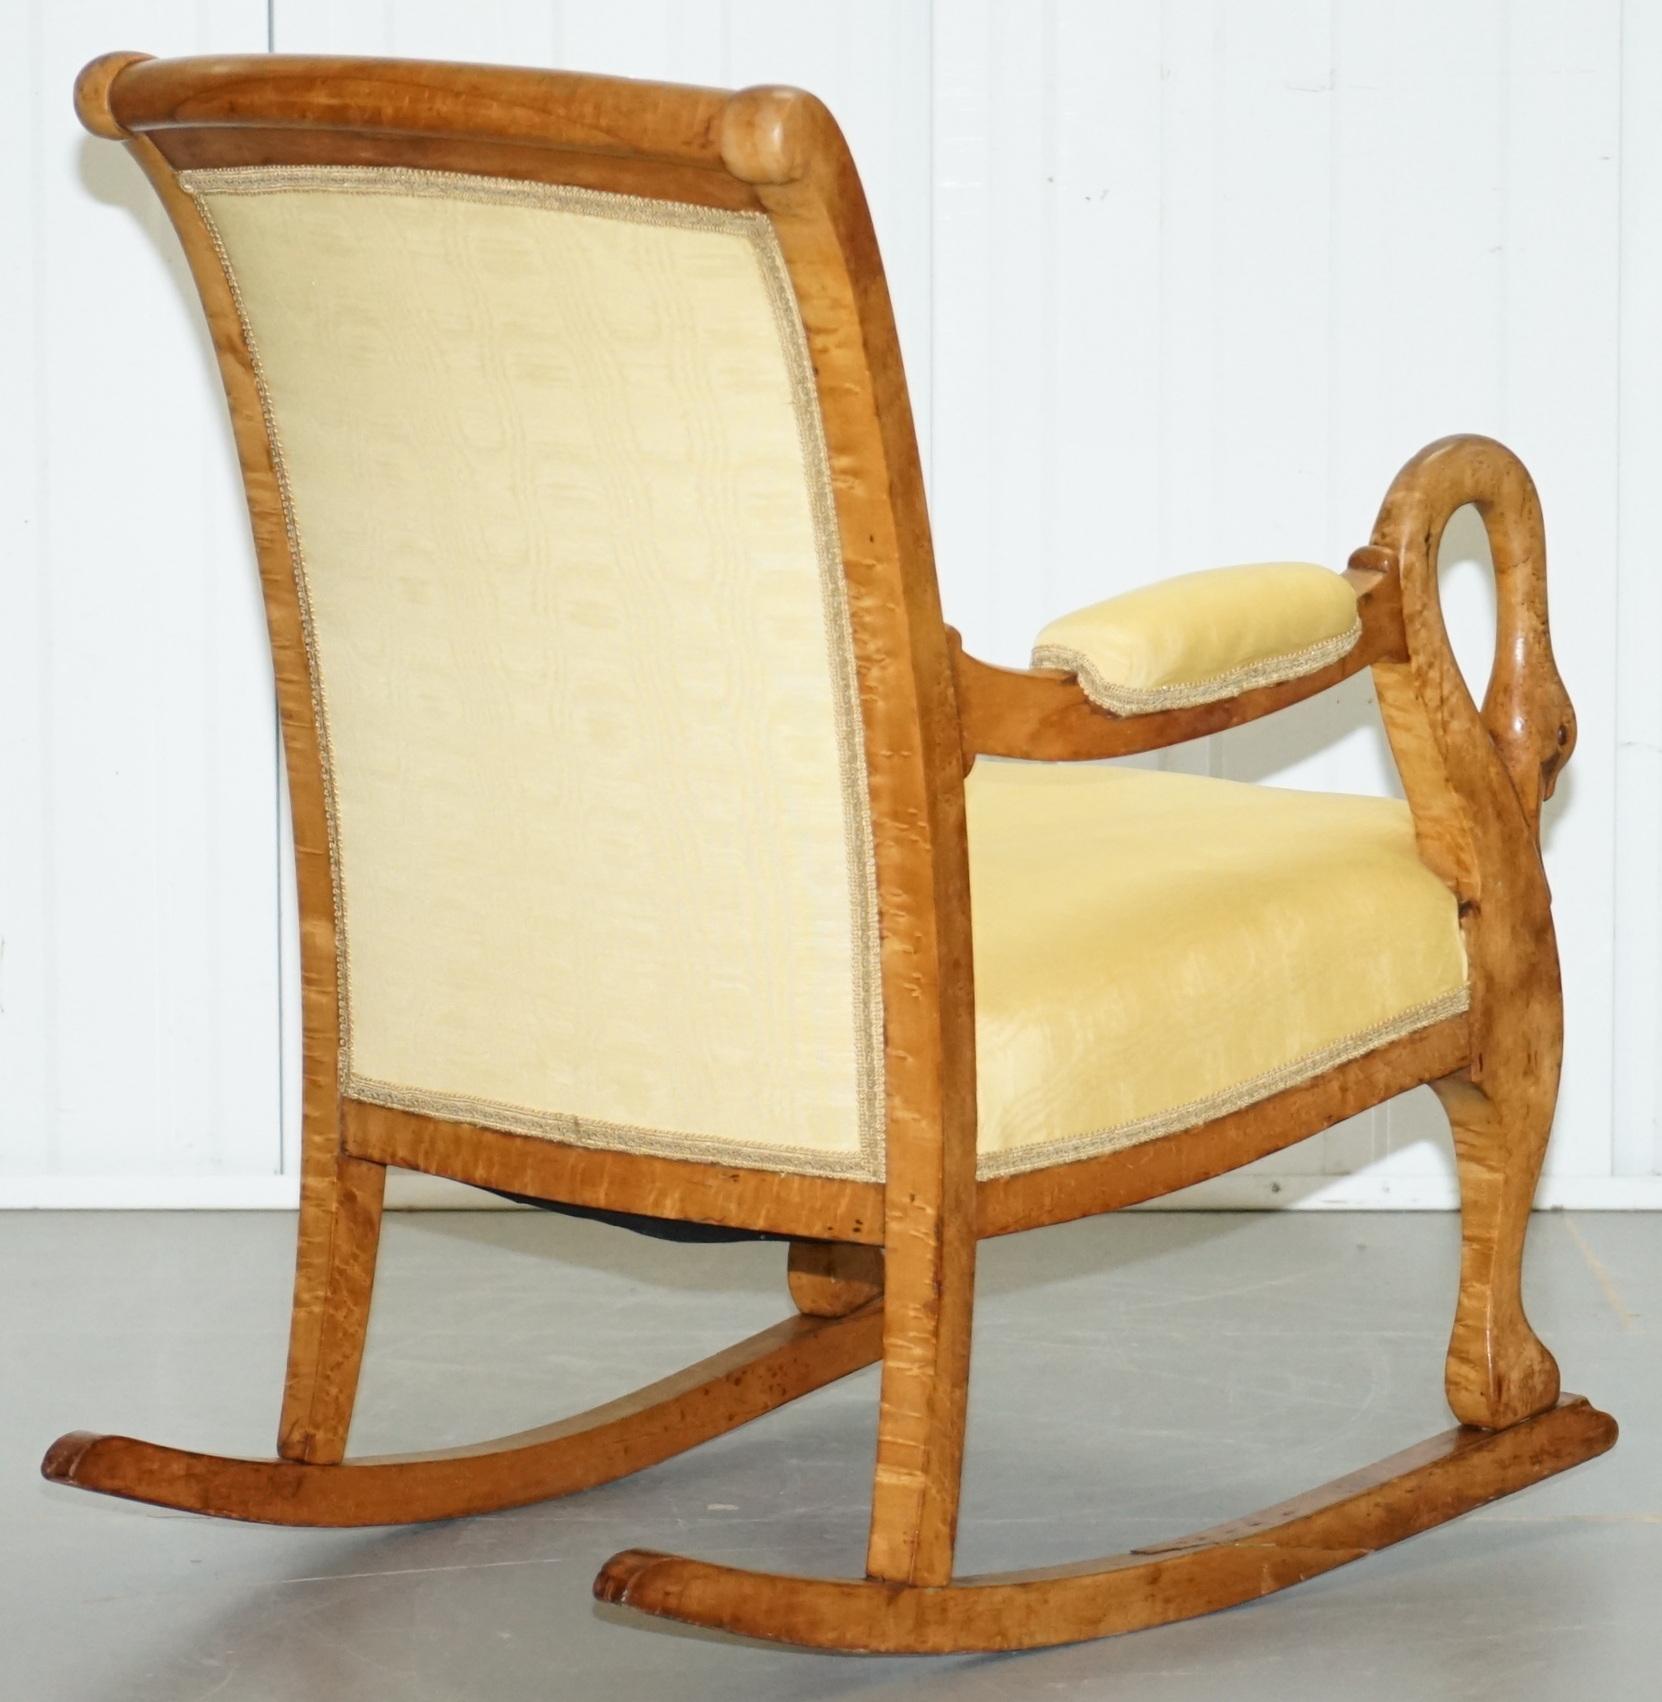 Rare circa 1825 Burr Maple Rocking Armchair with Hand Carved Swan Detailed Arms 8